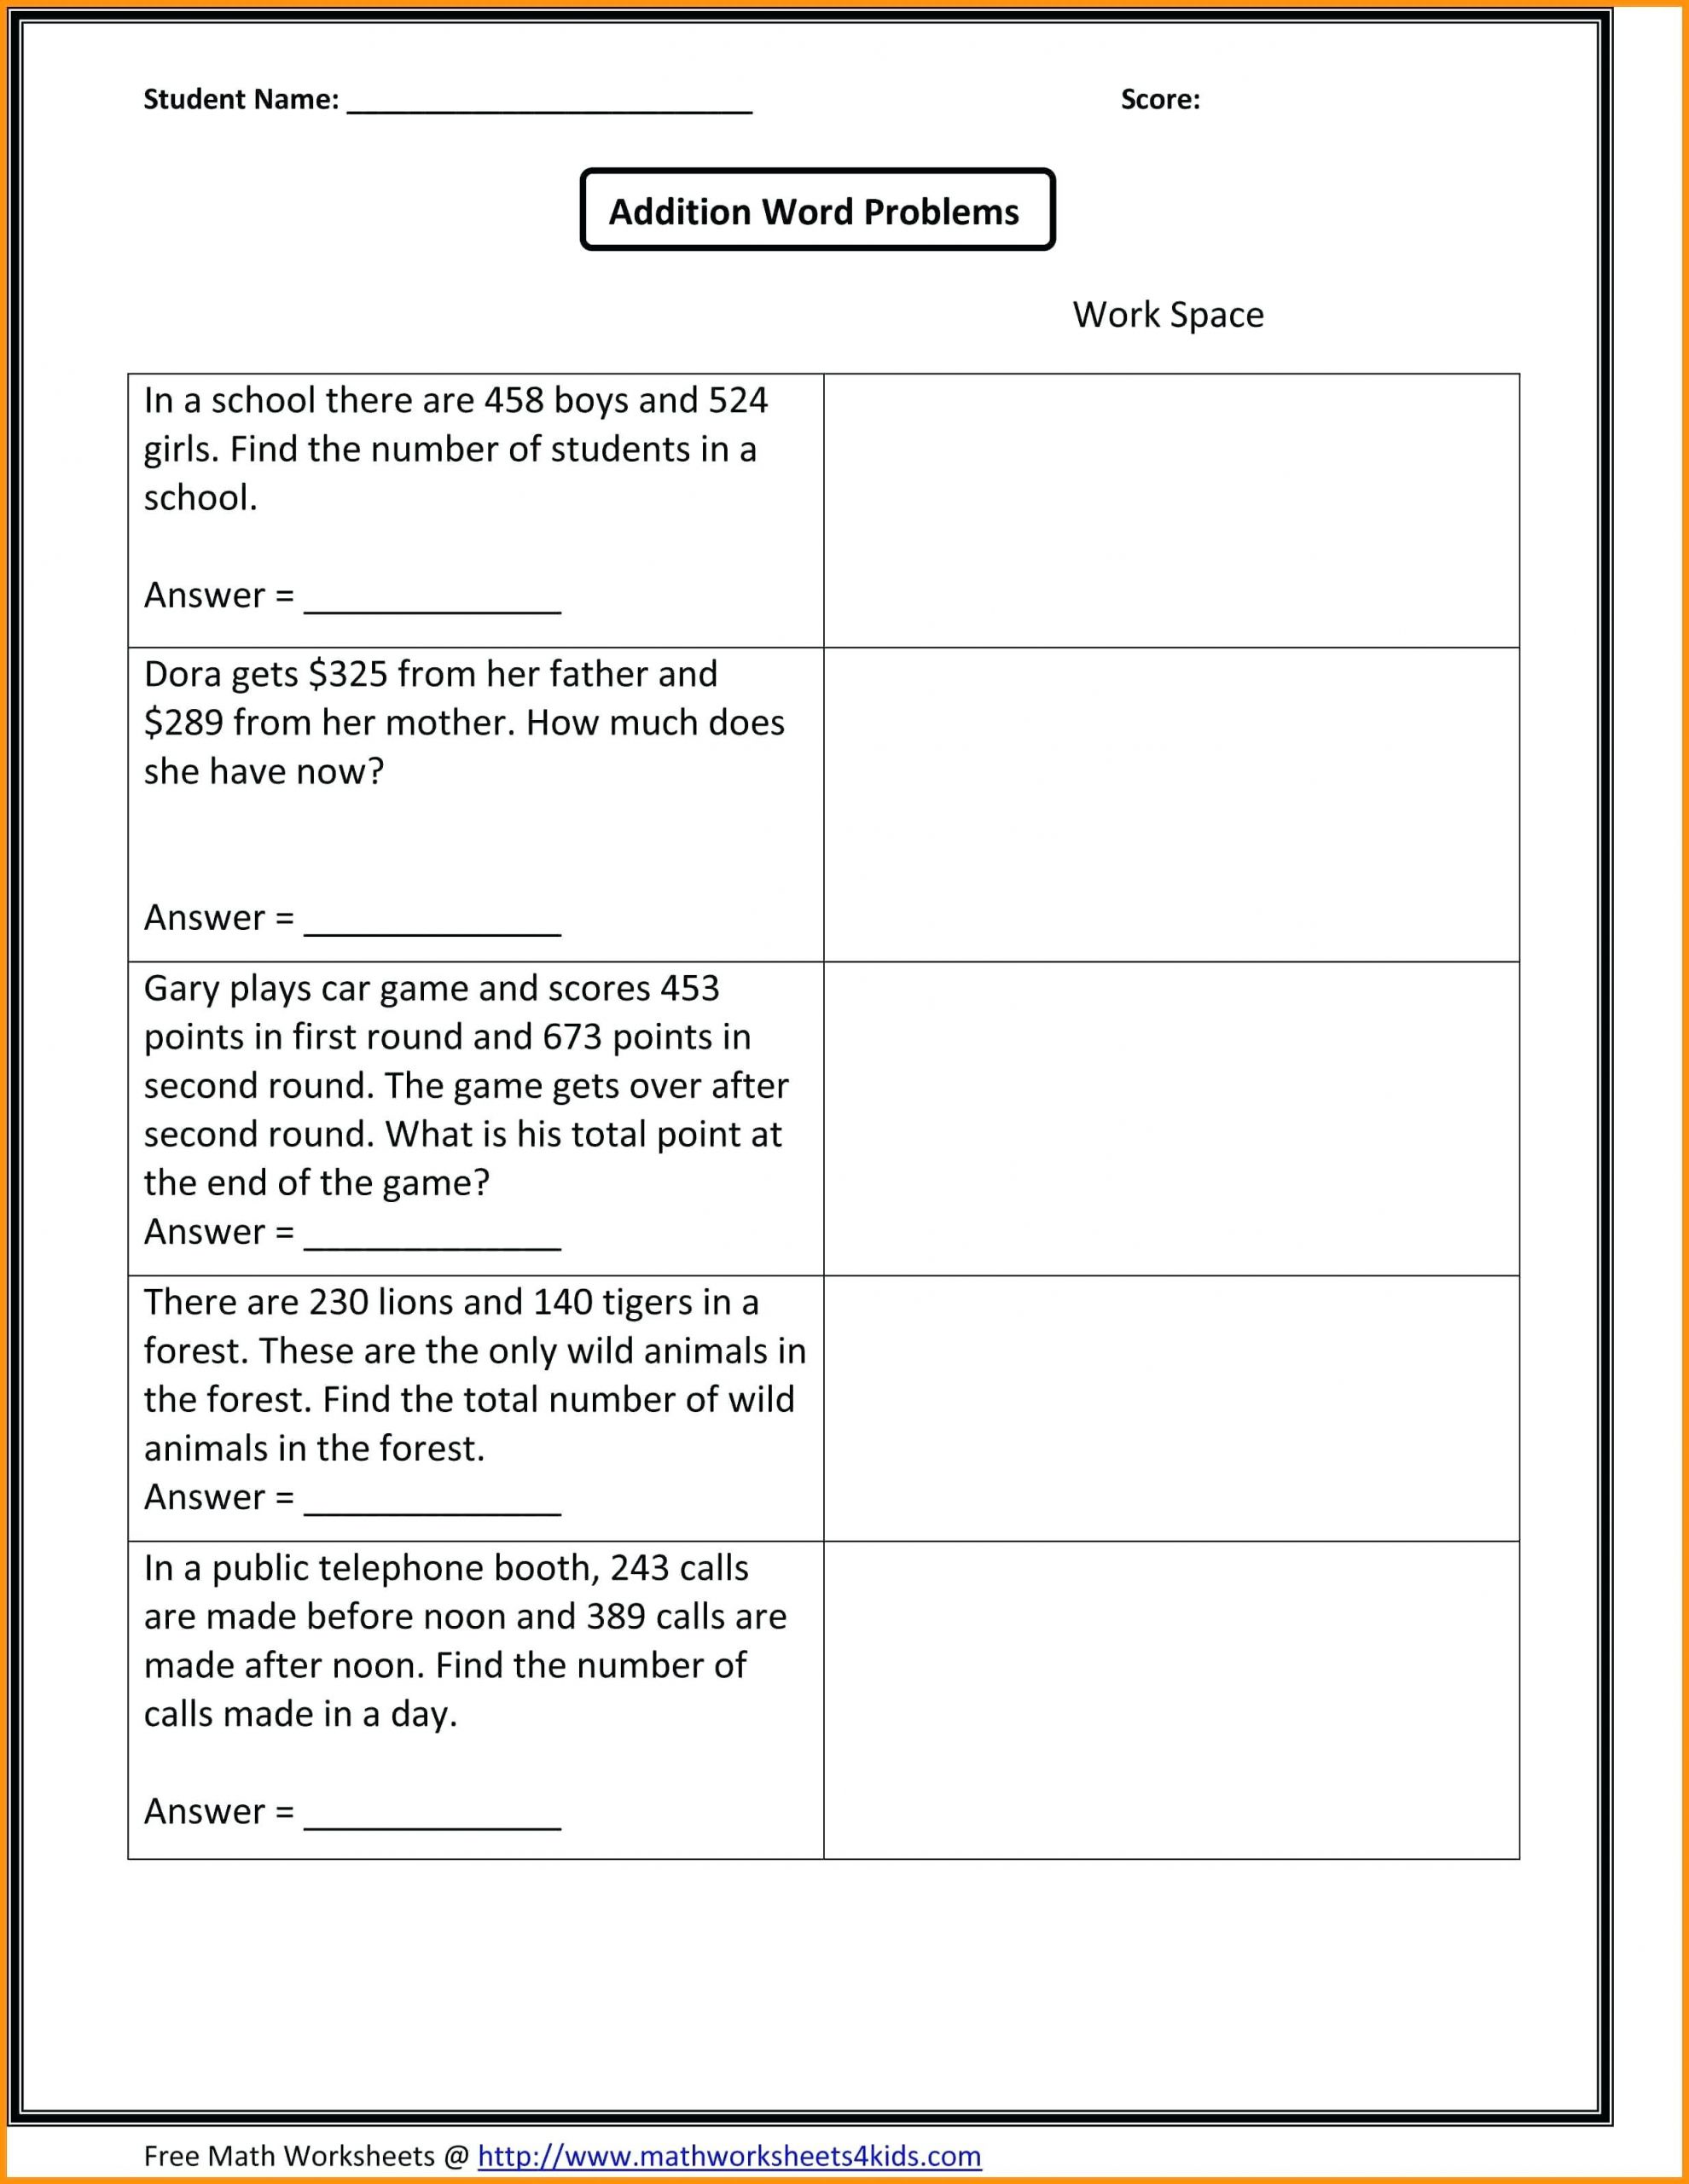 Free Math Worksheets Second Grade 2 Addition Adding 3 Digit and 1 Digit Numbers